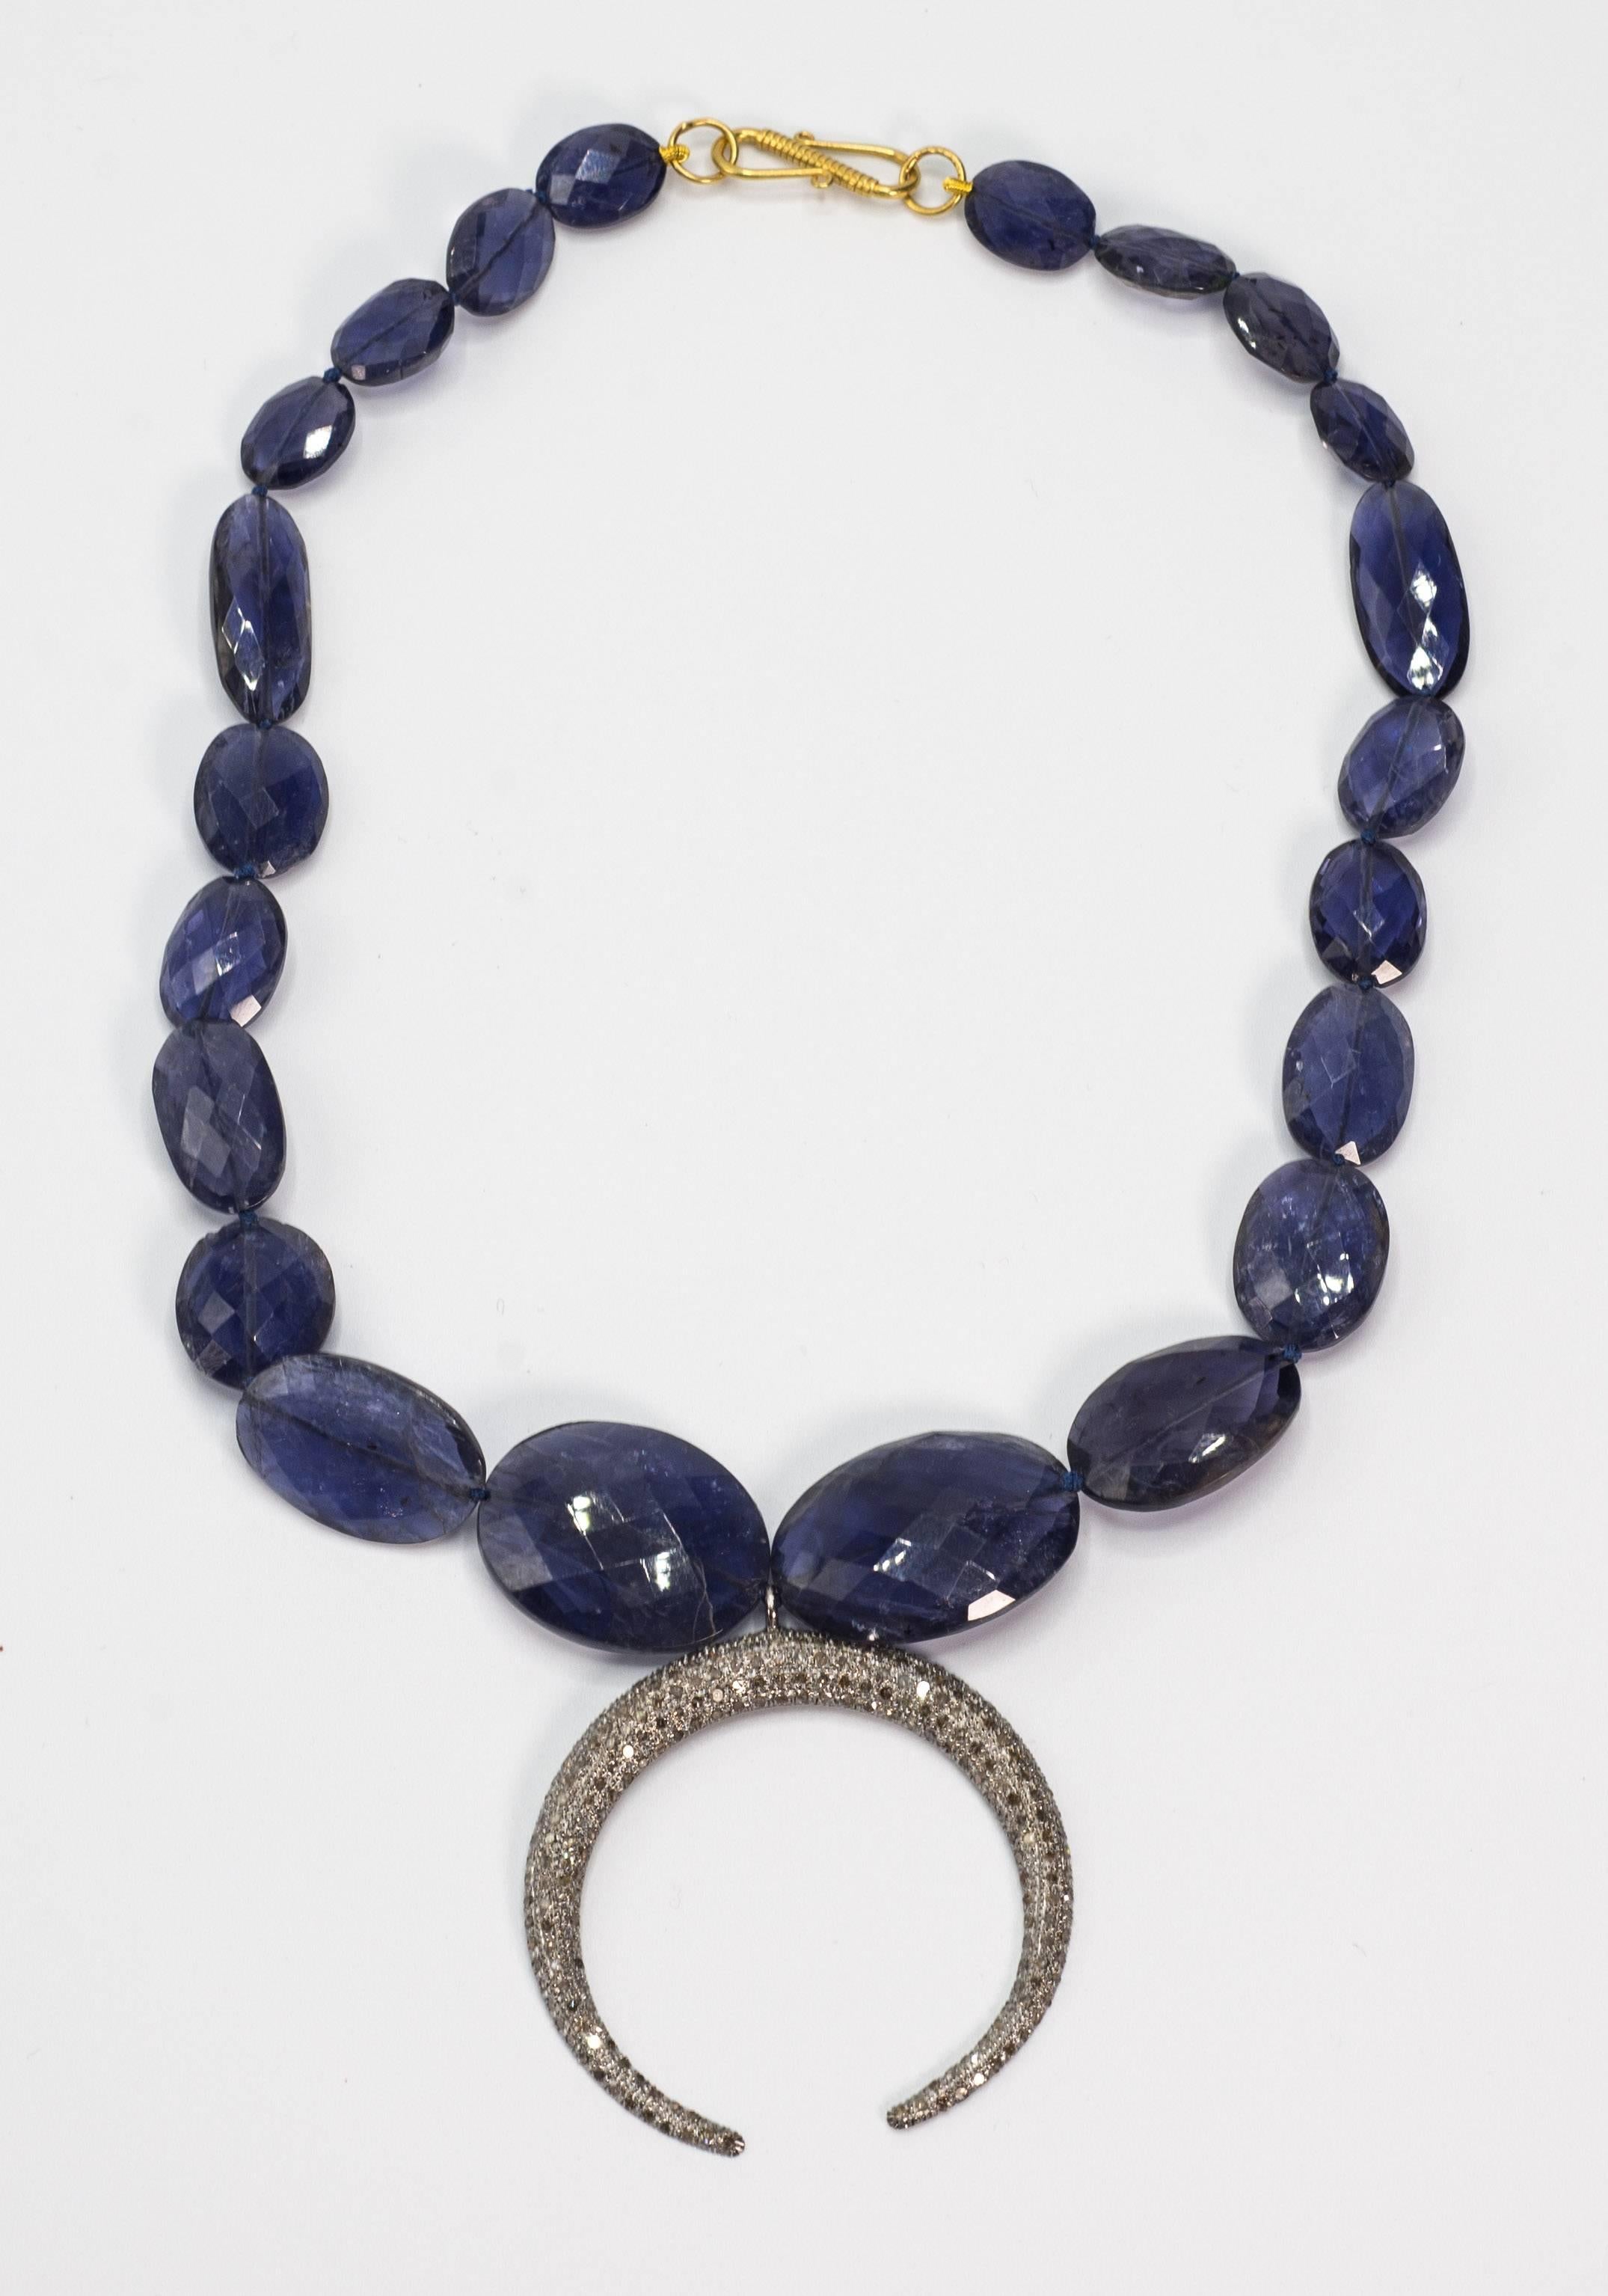 Blue Kyanite faceted beads weighing approximately 240 carats suspending a pave antique cut silver mounted crescent attached to a gold clasp.
The necklace is 16'' long and the crescent is 1/5 inches diameter.